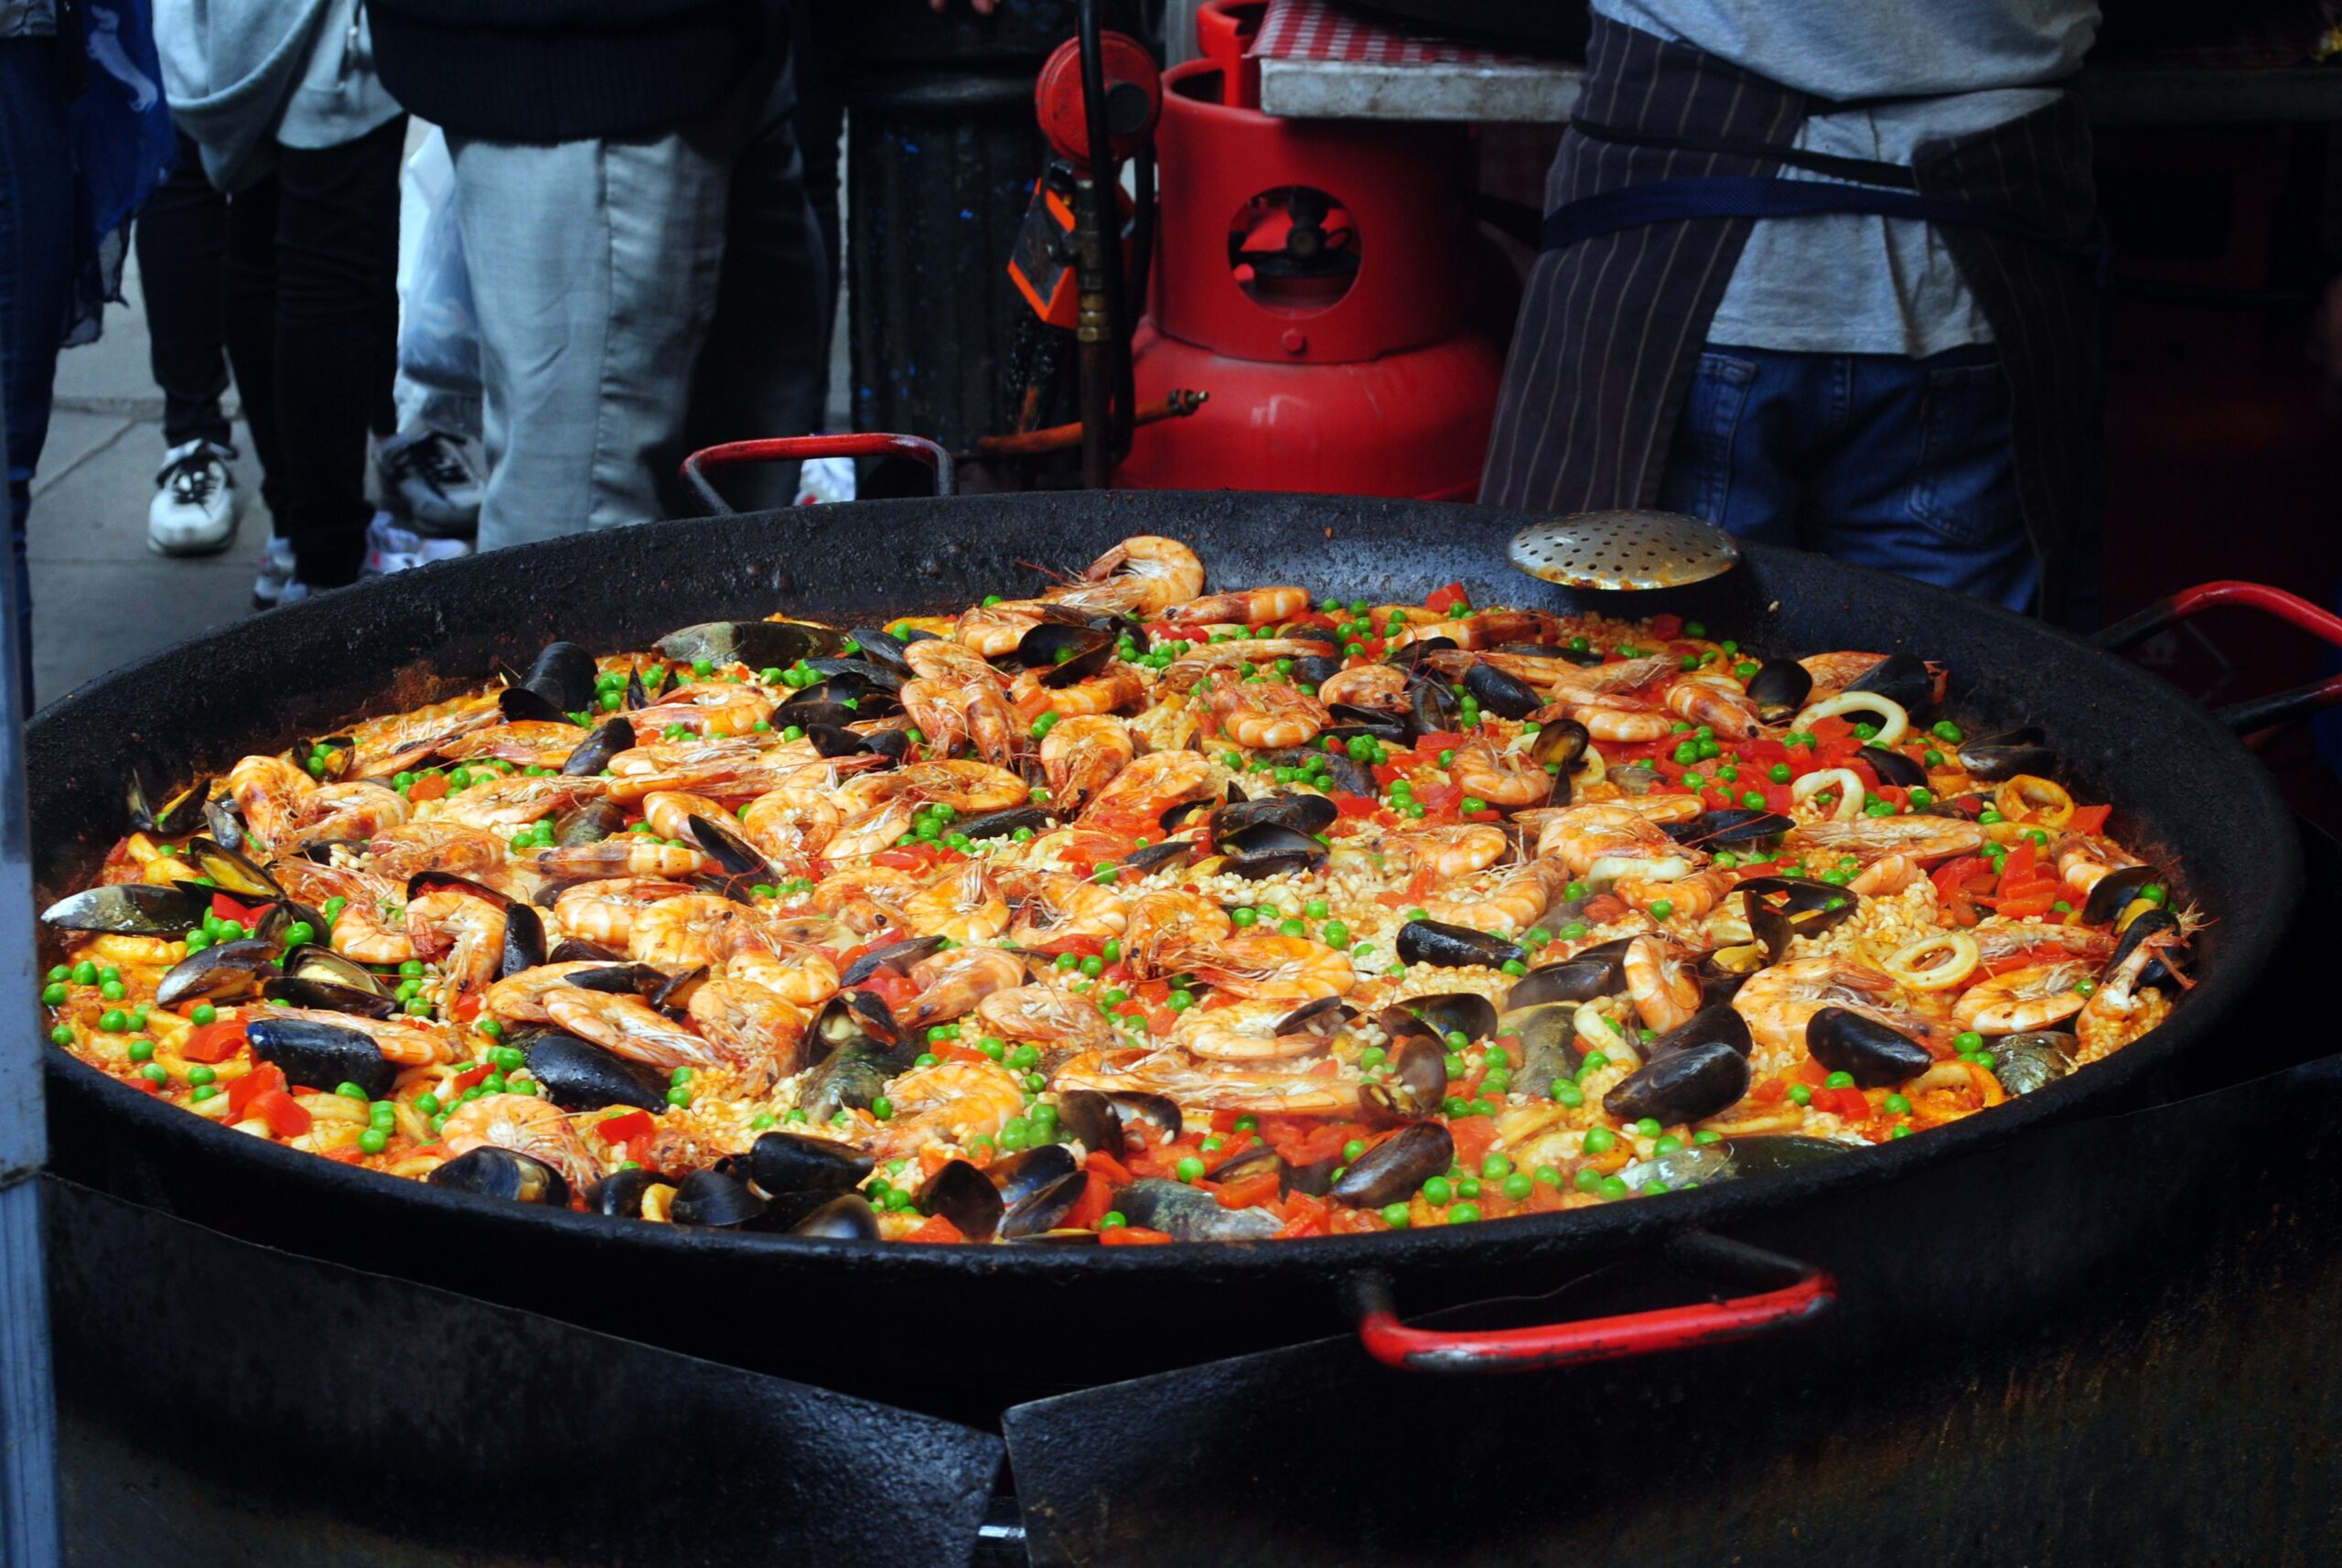 On Sundays we eat paella with the family